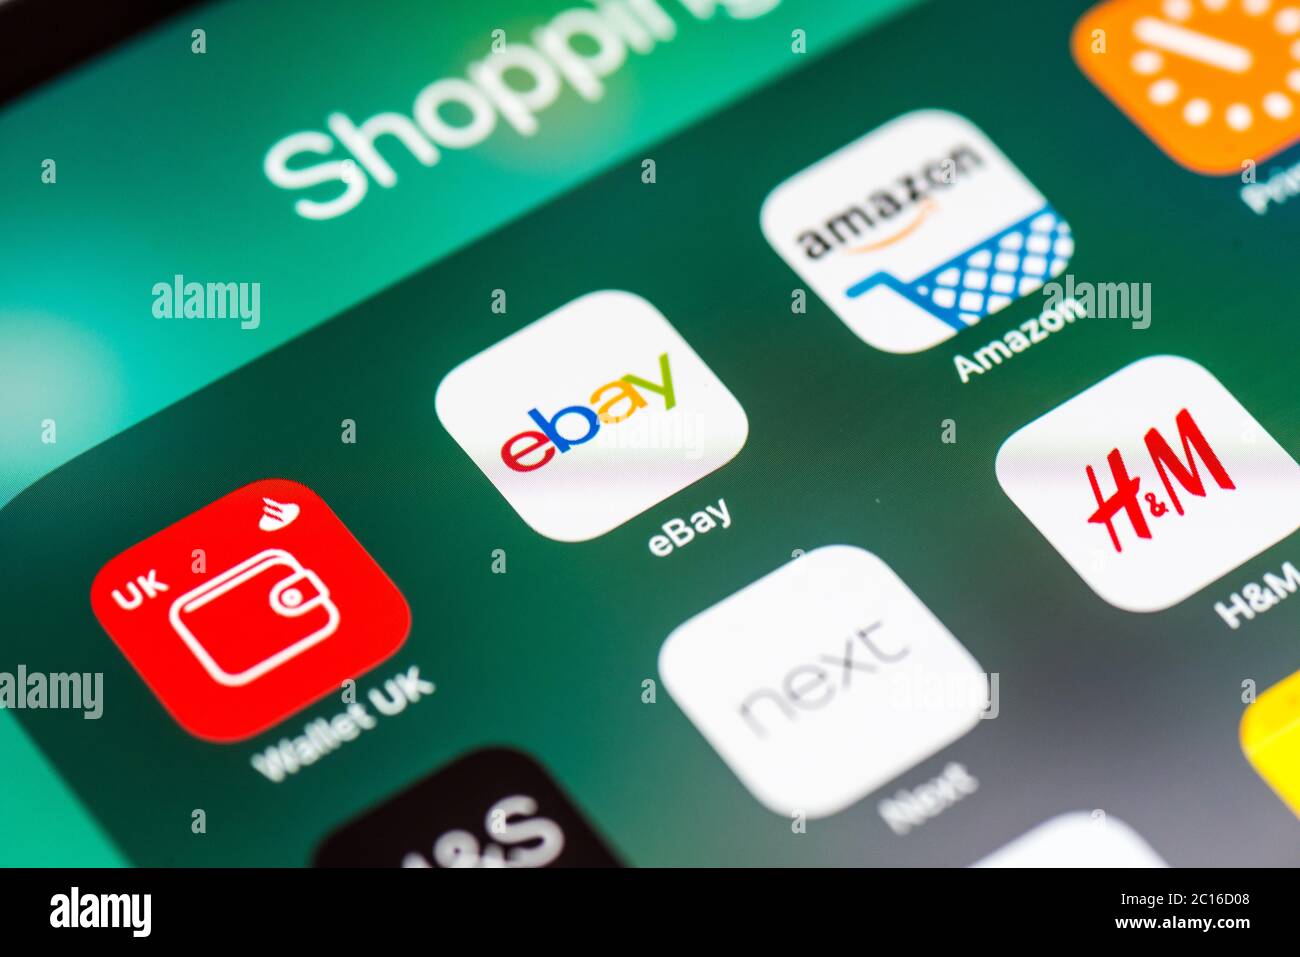 eBay app along with other apps on a digital device Stock Photo - Alamy